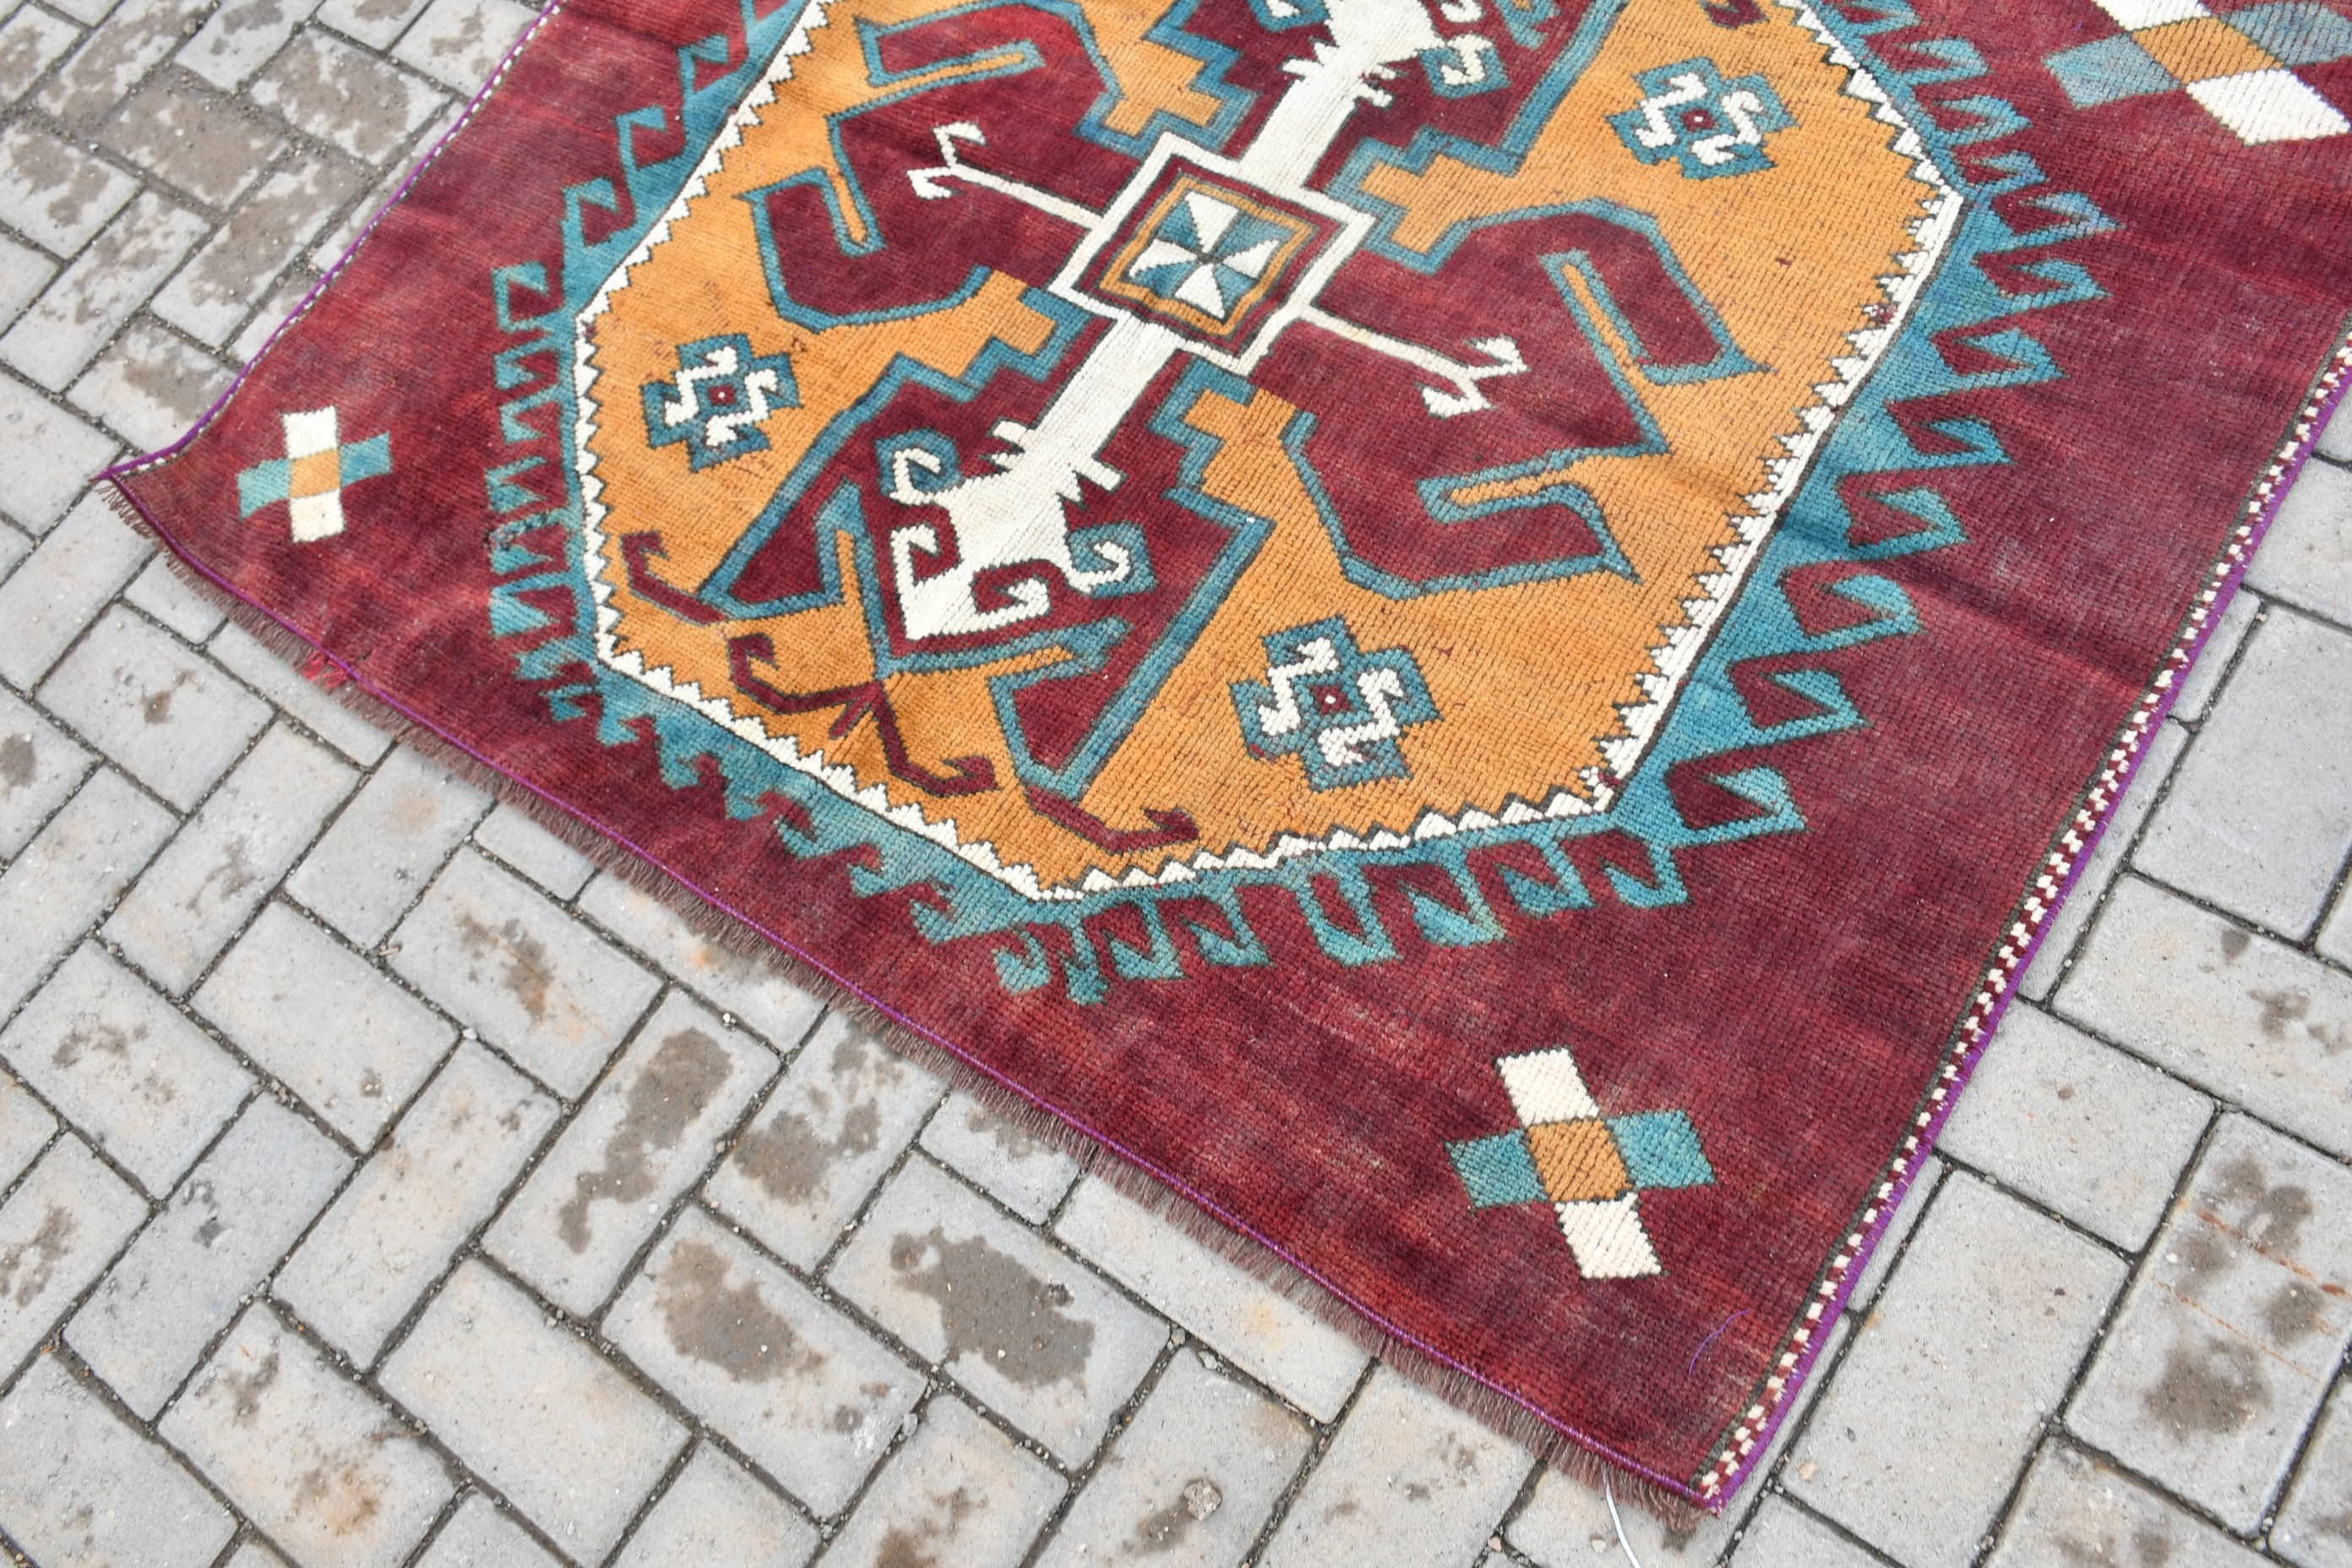 Floor Rugs, Vintage Rugs, Kitchen Rugs, Red Cool Rugs, Rugs for Bedroom, Oriental Rugs, Bedroom Rugs, Turkish Rugs, 4.5x3.8 ft Accent Rug